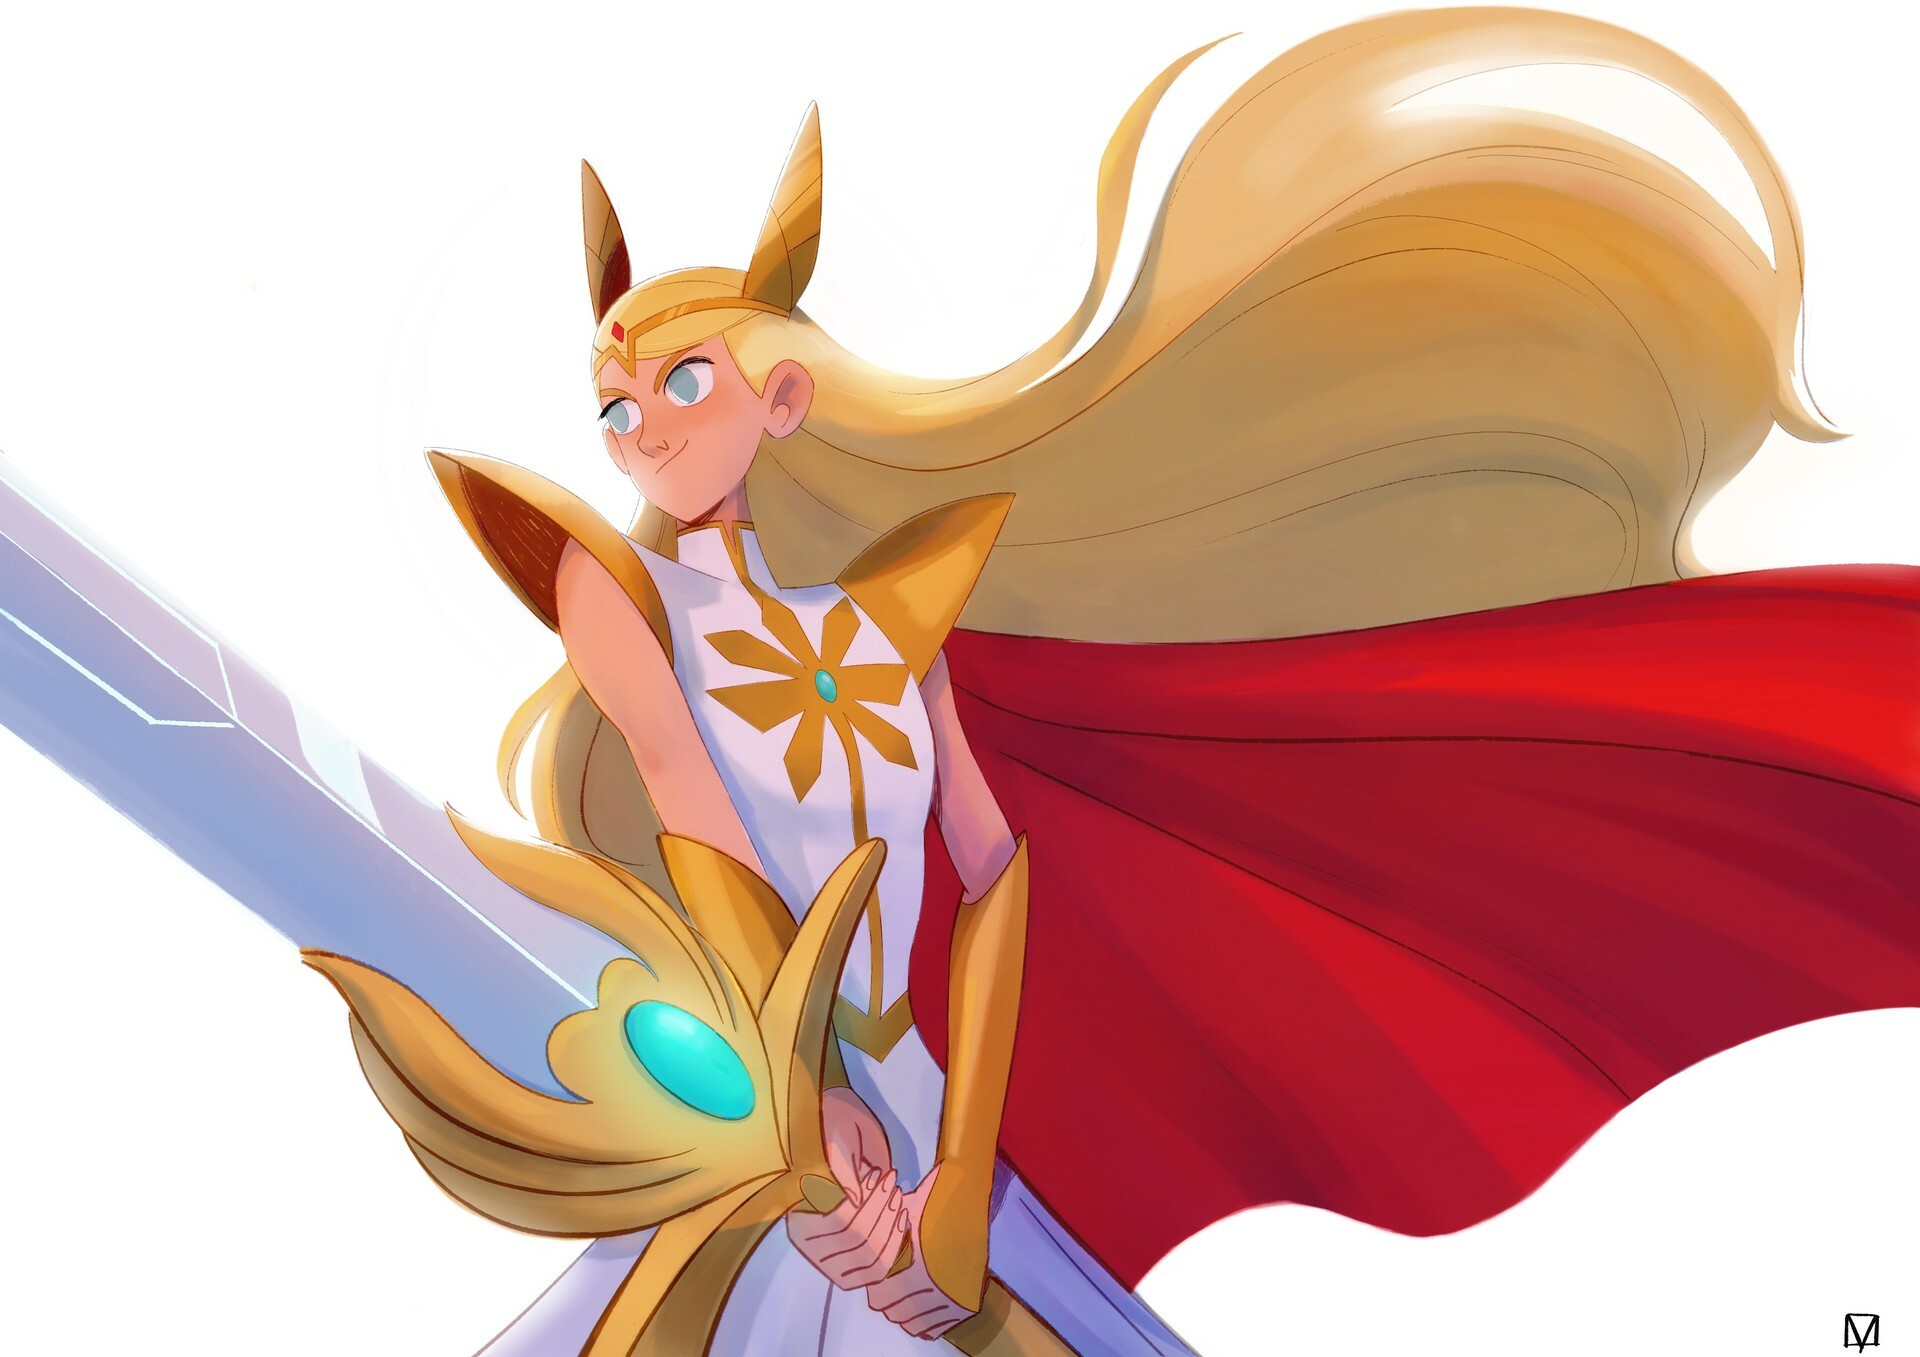 Fanart She-Ra and the Princesses of Power.